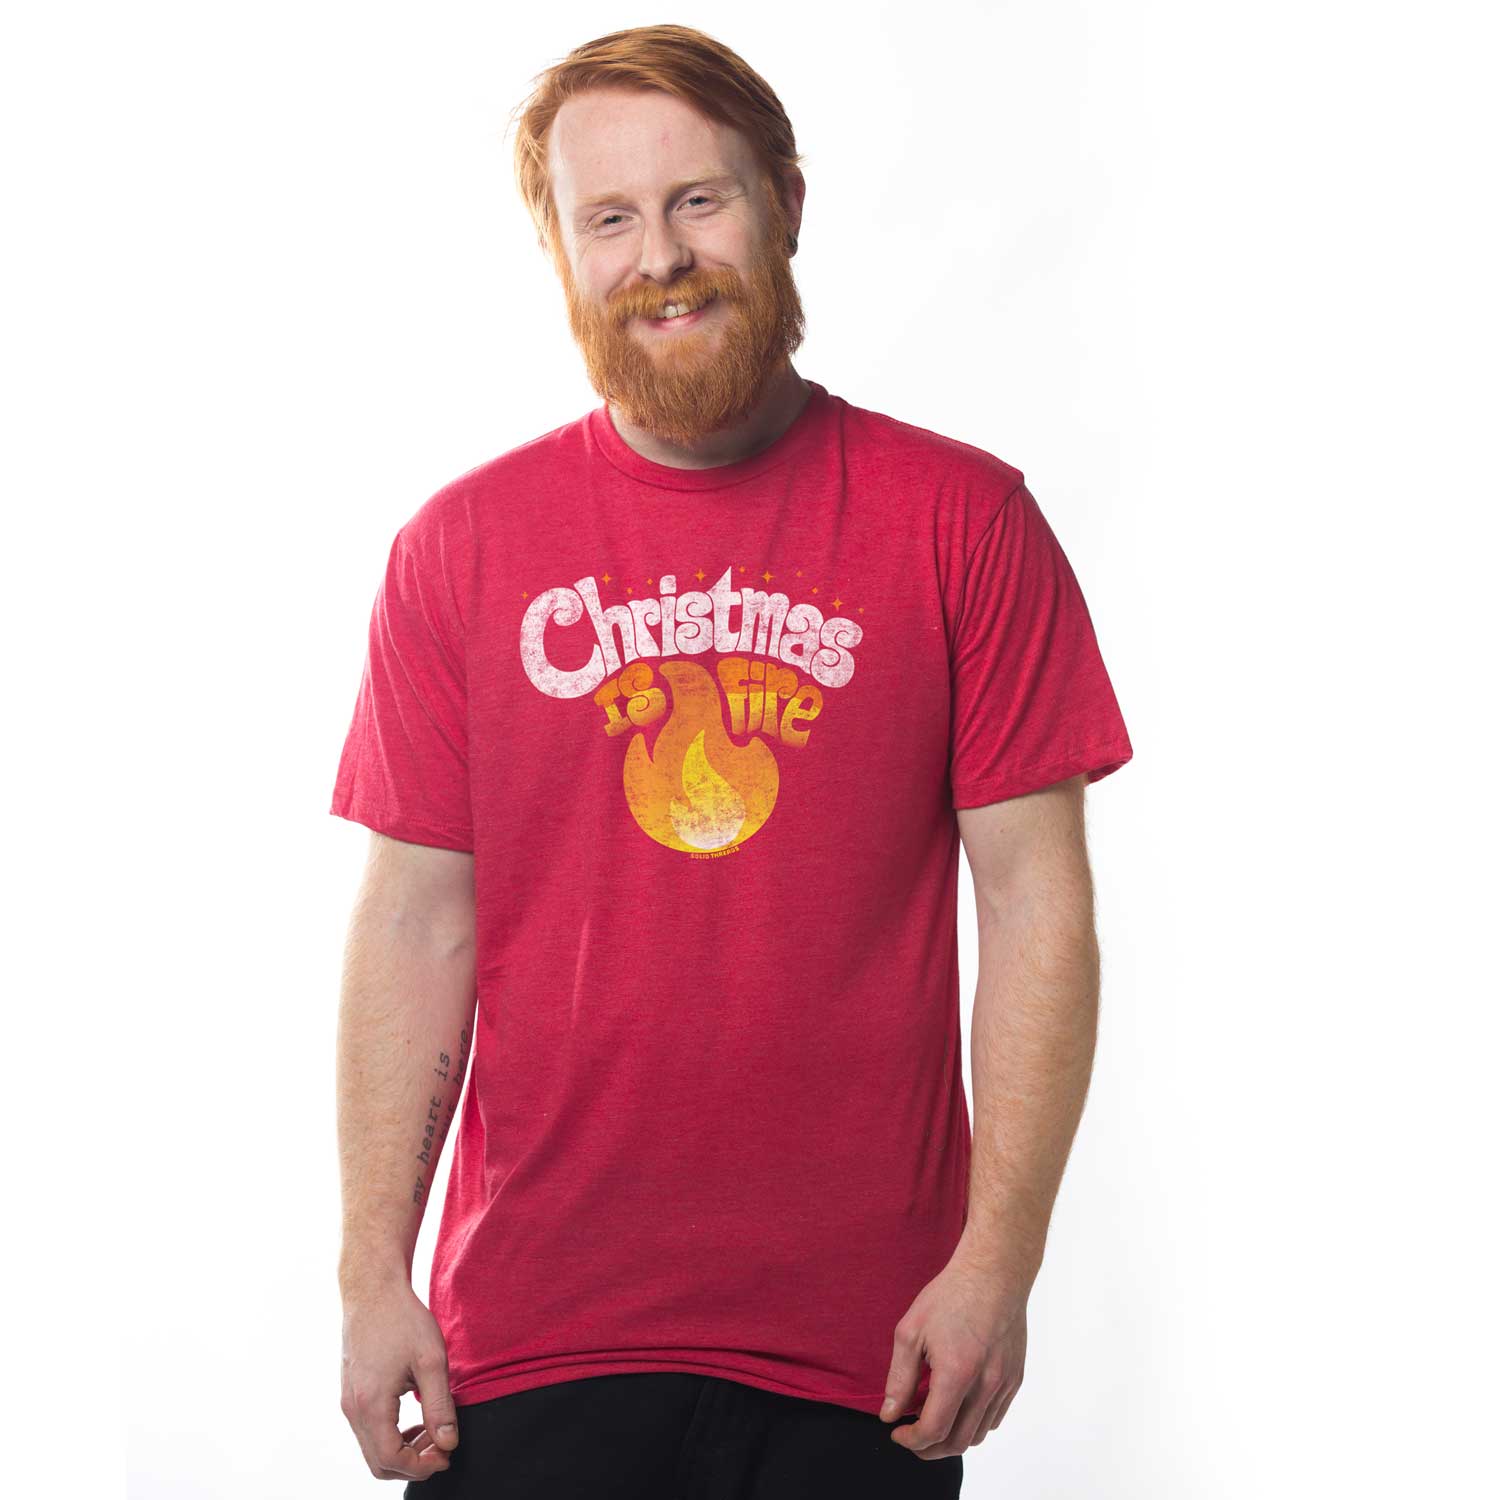 Men's Christmas Is Fire Vintage Graphic T-Shirt | Funny Holiday Party Tee | Solid Threads